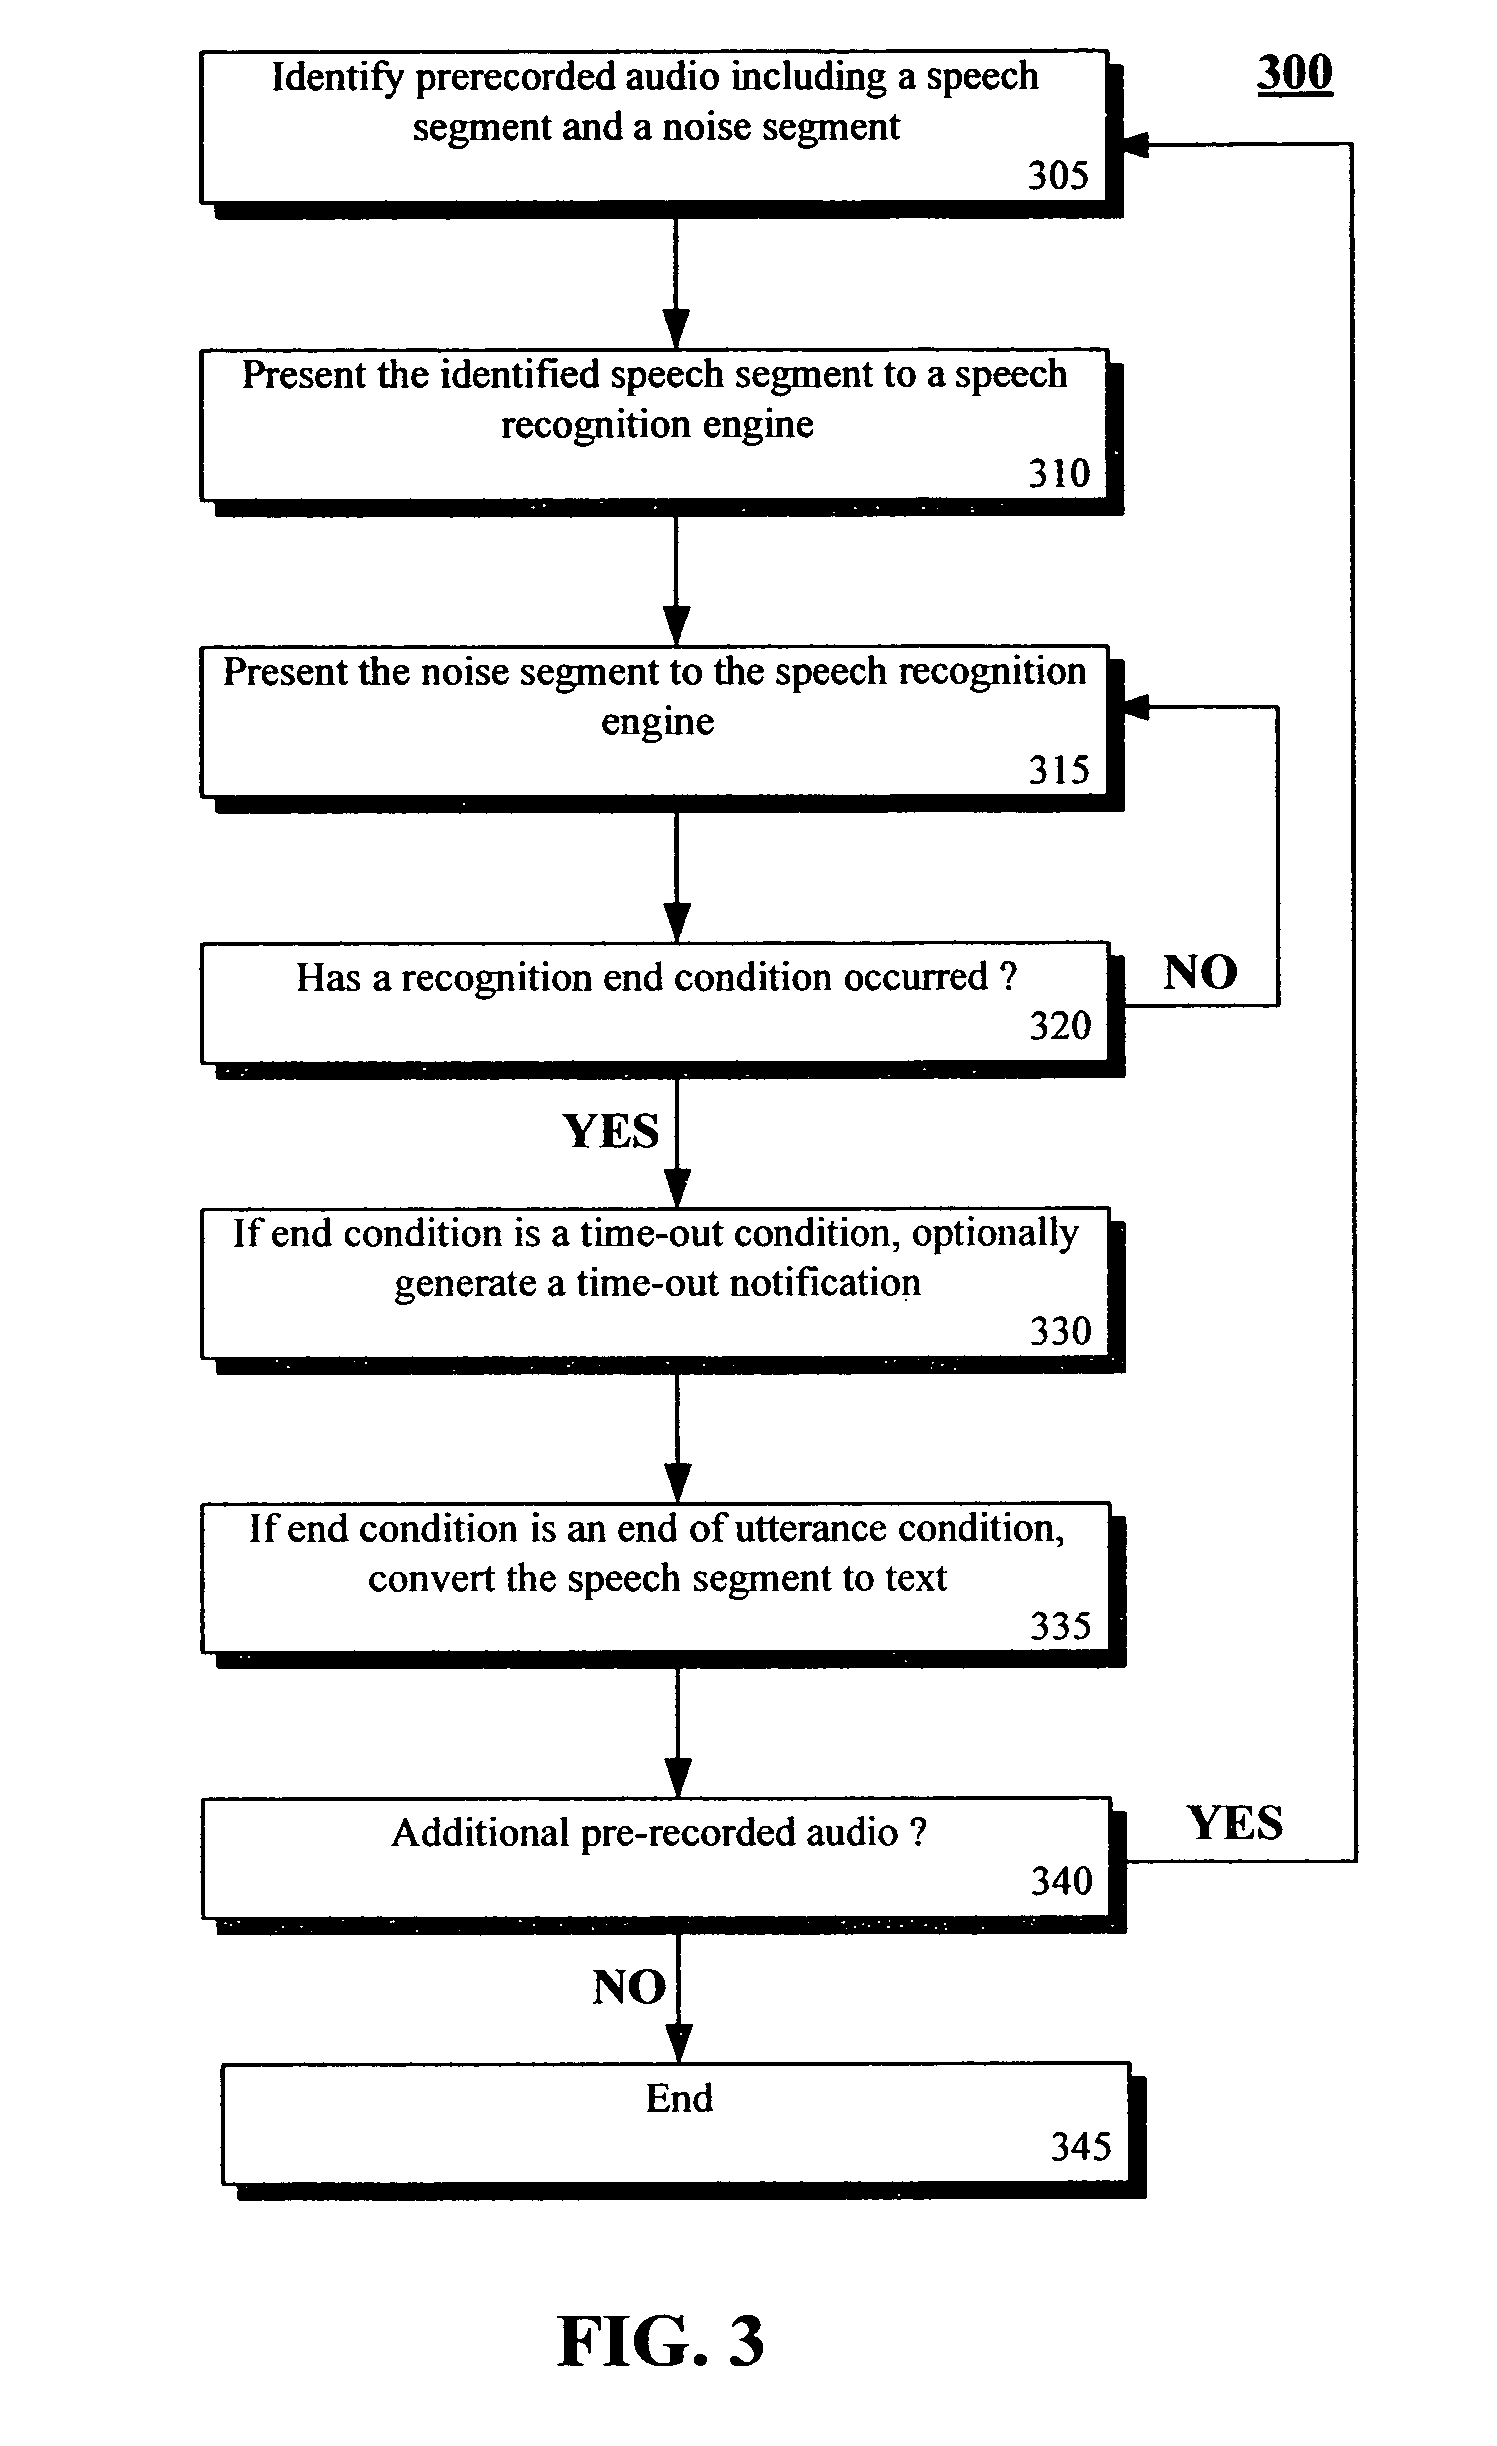 Noise playback enhancement of prerecorded audio for speech recognition operations